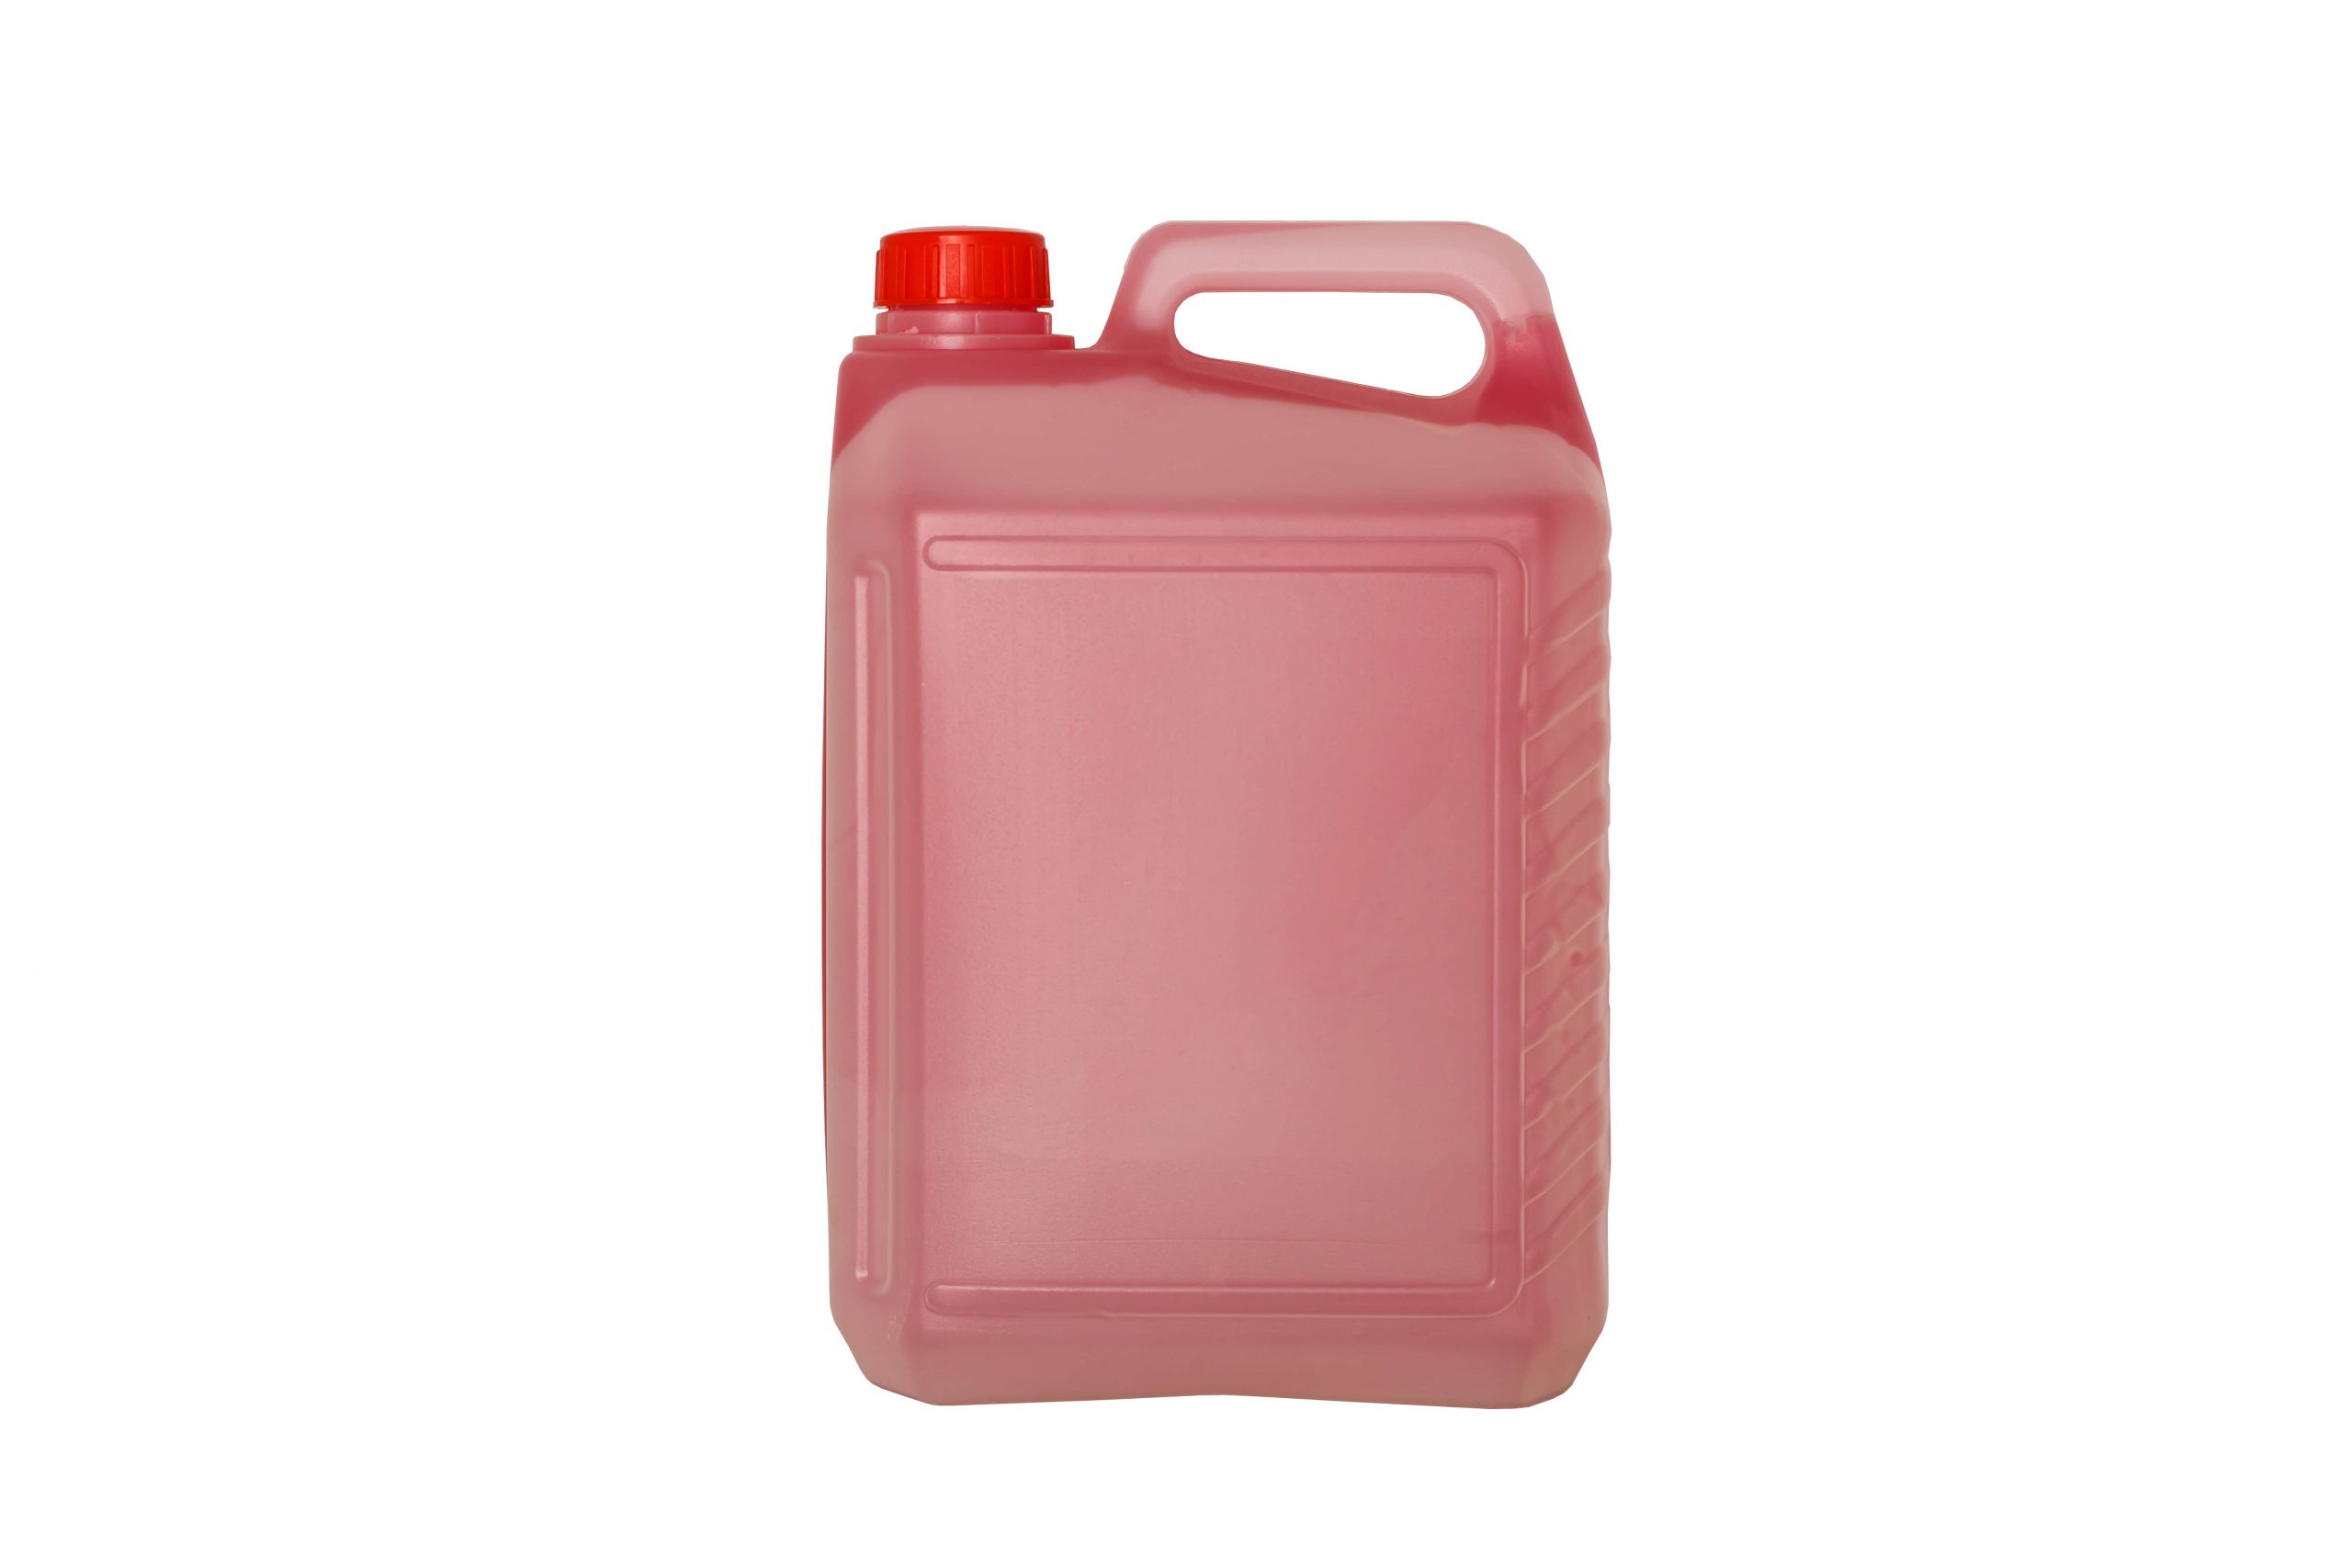 Plastic jerry can with red diesel inside